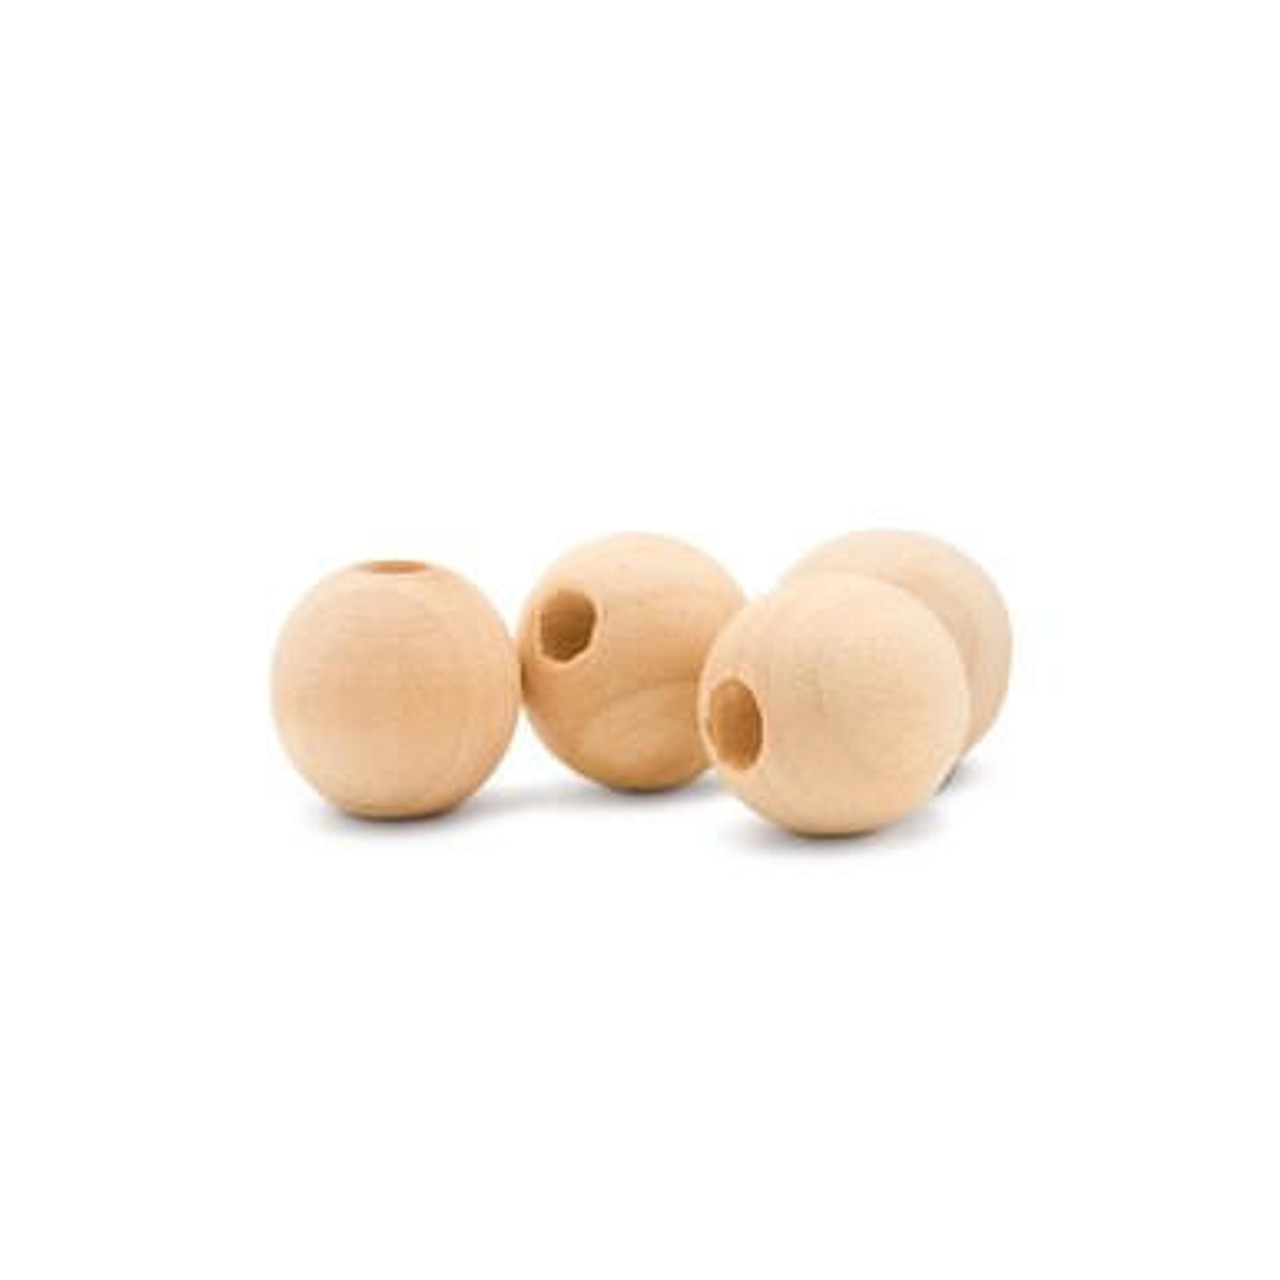 Round Wood Beads 1 inch with 3/8 inch Hole